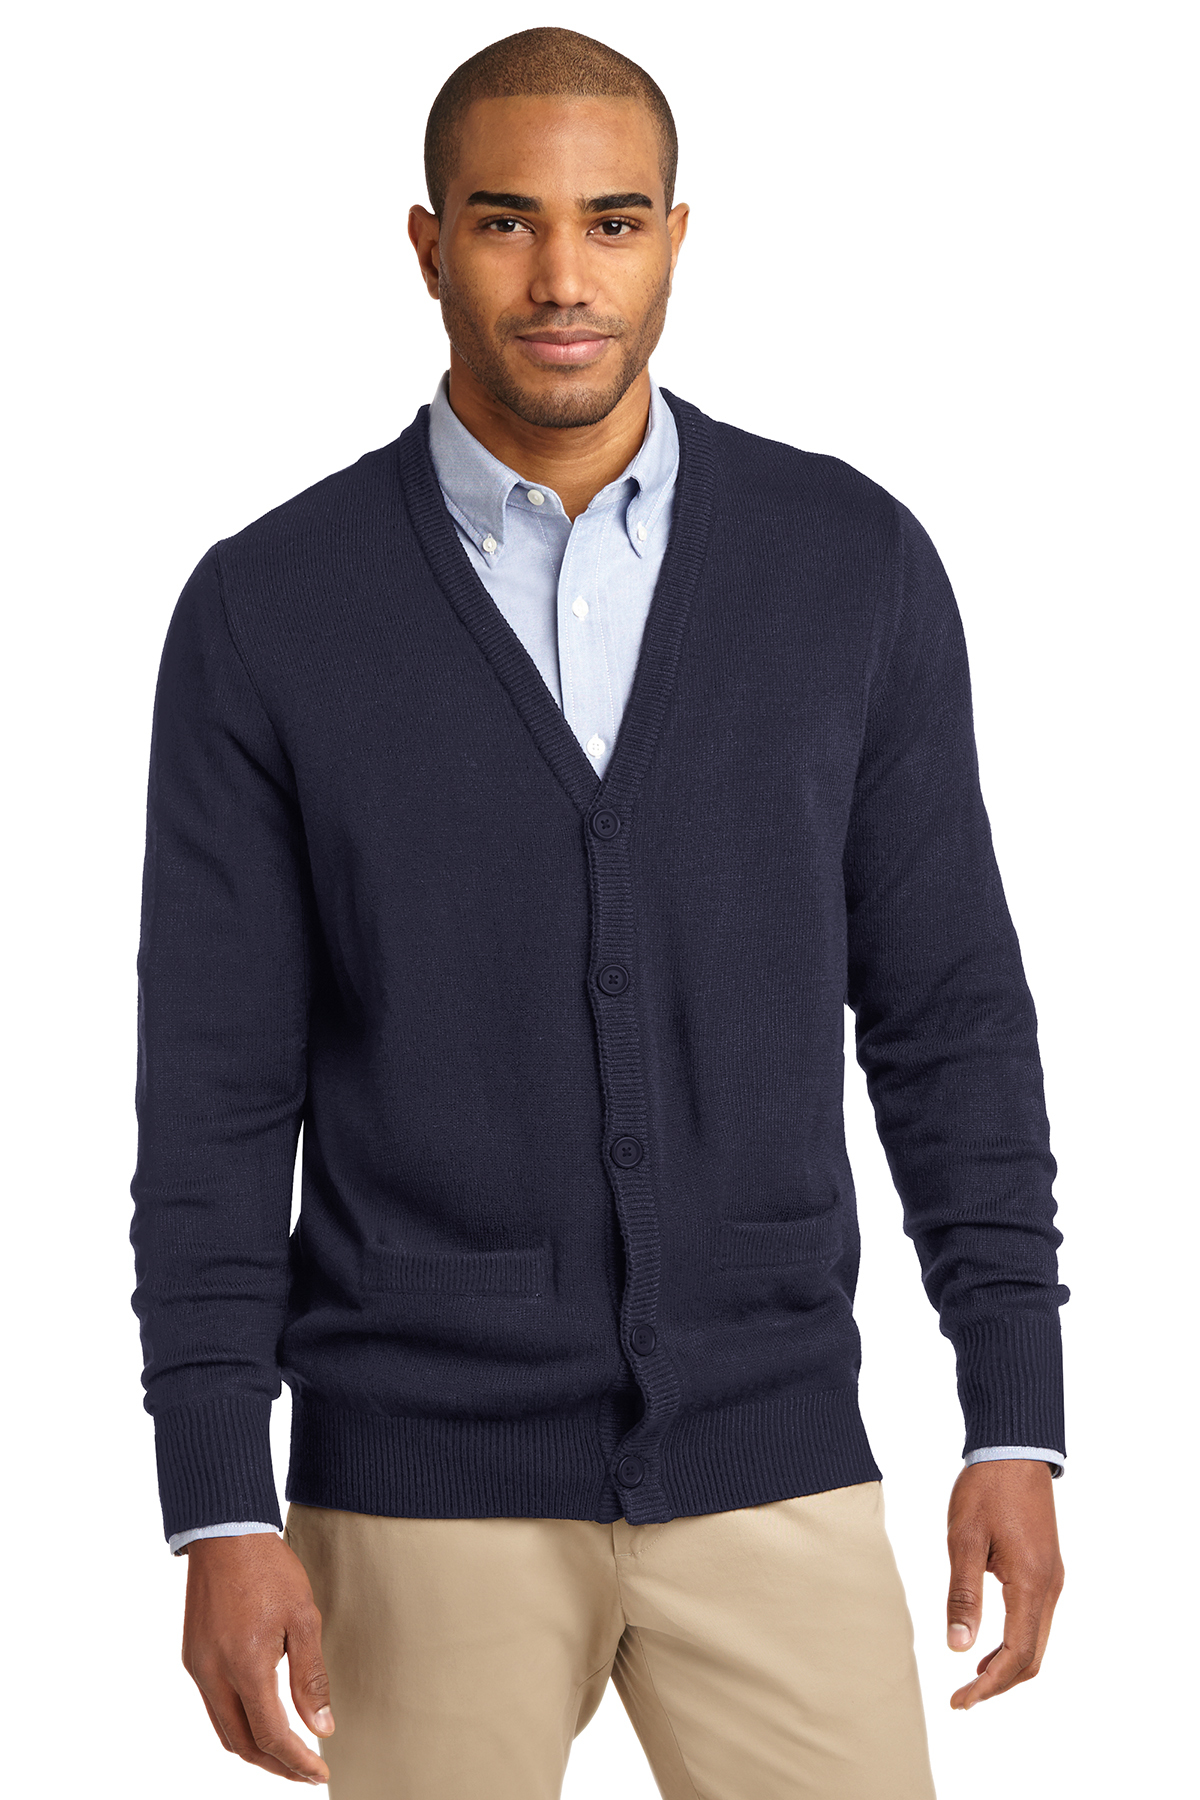 SW302 Port Authority® Value V-Neck Cardigan Sweater with PocketsTrophy